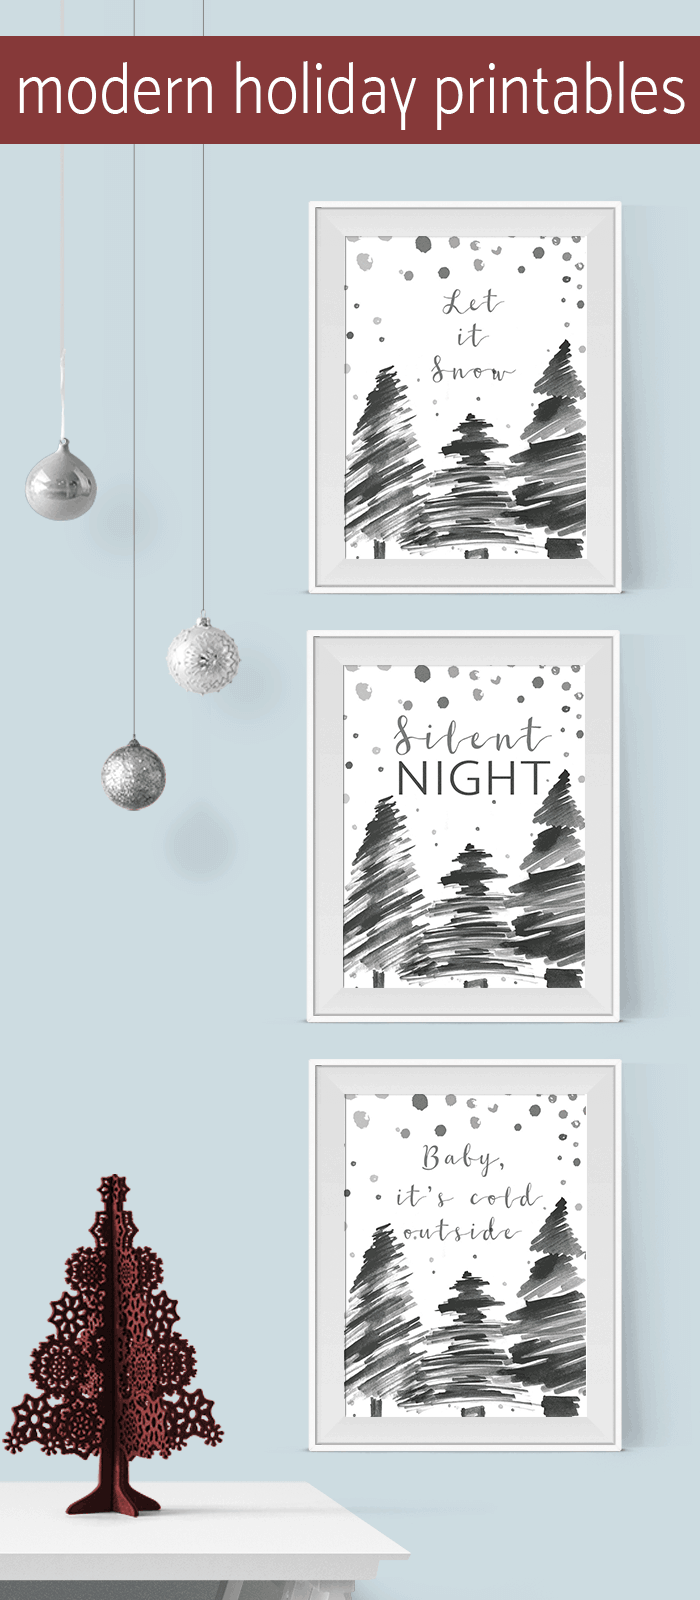 Get these free modern holiday printables AND 10 ways to use printables this holiday season!